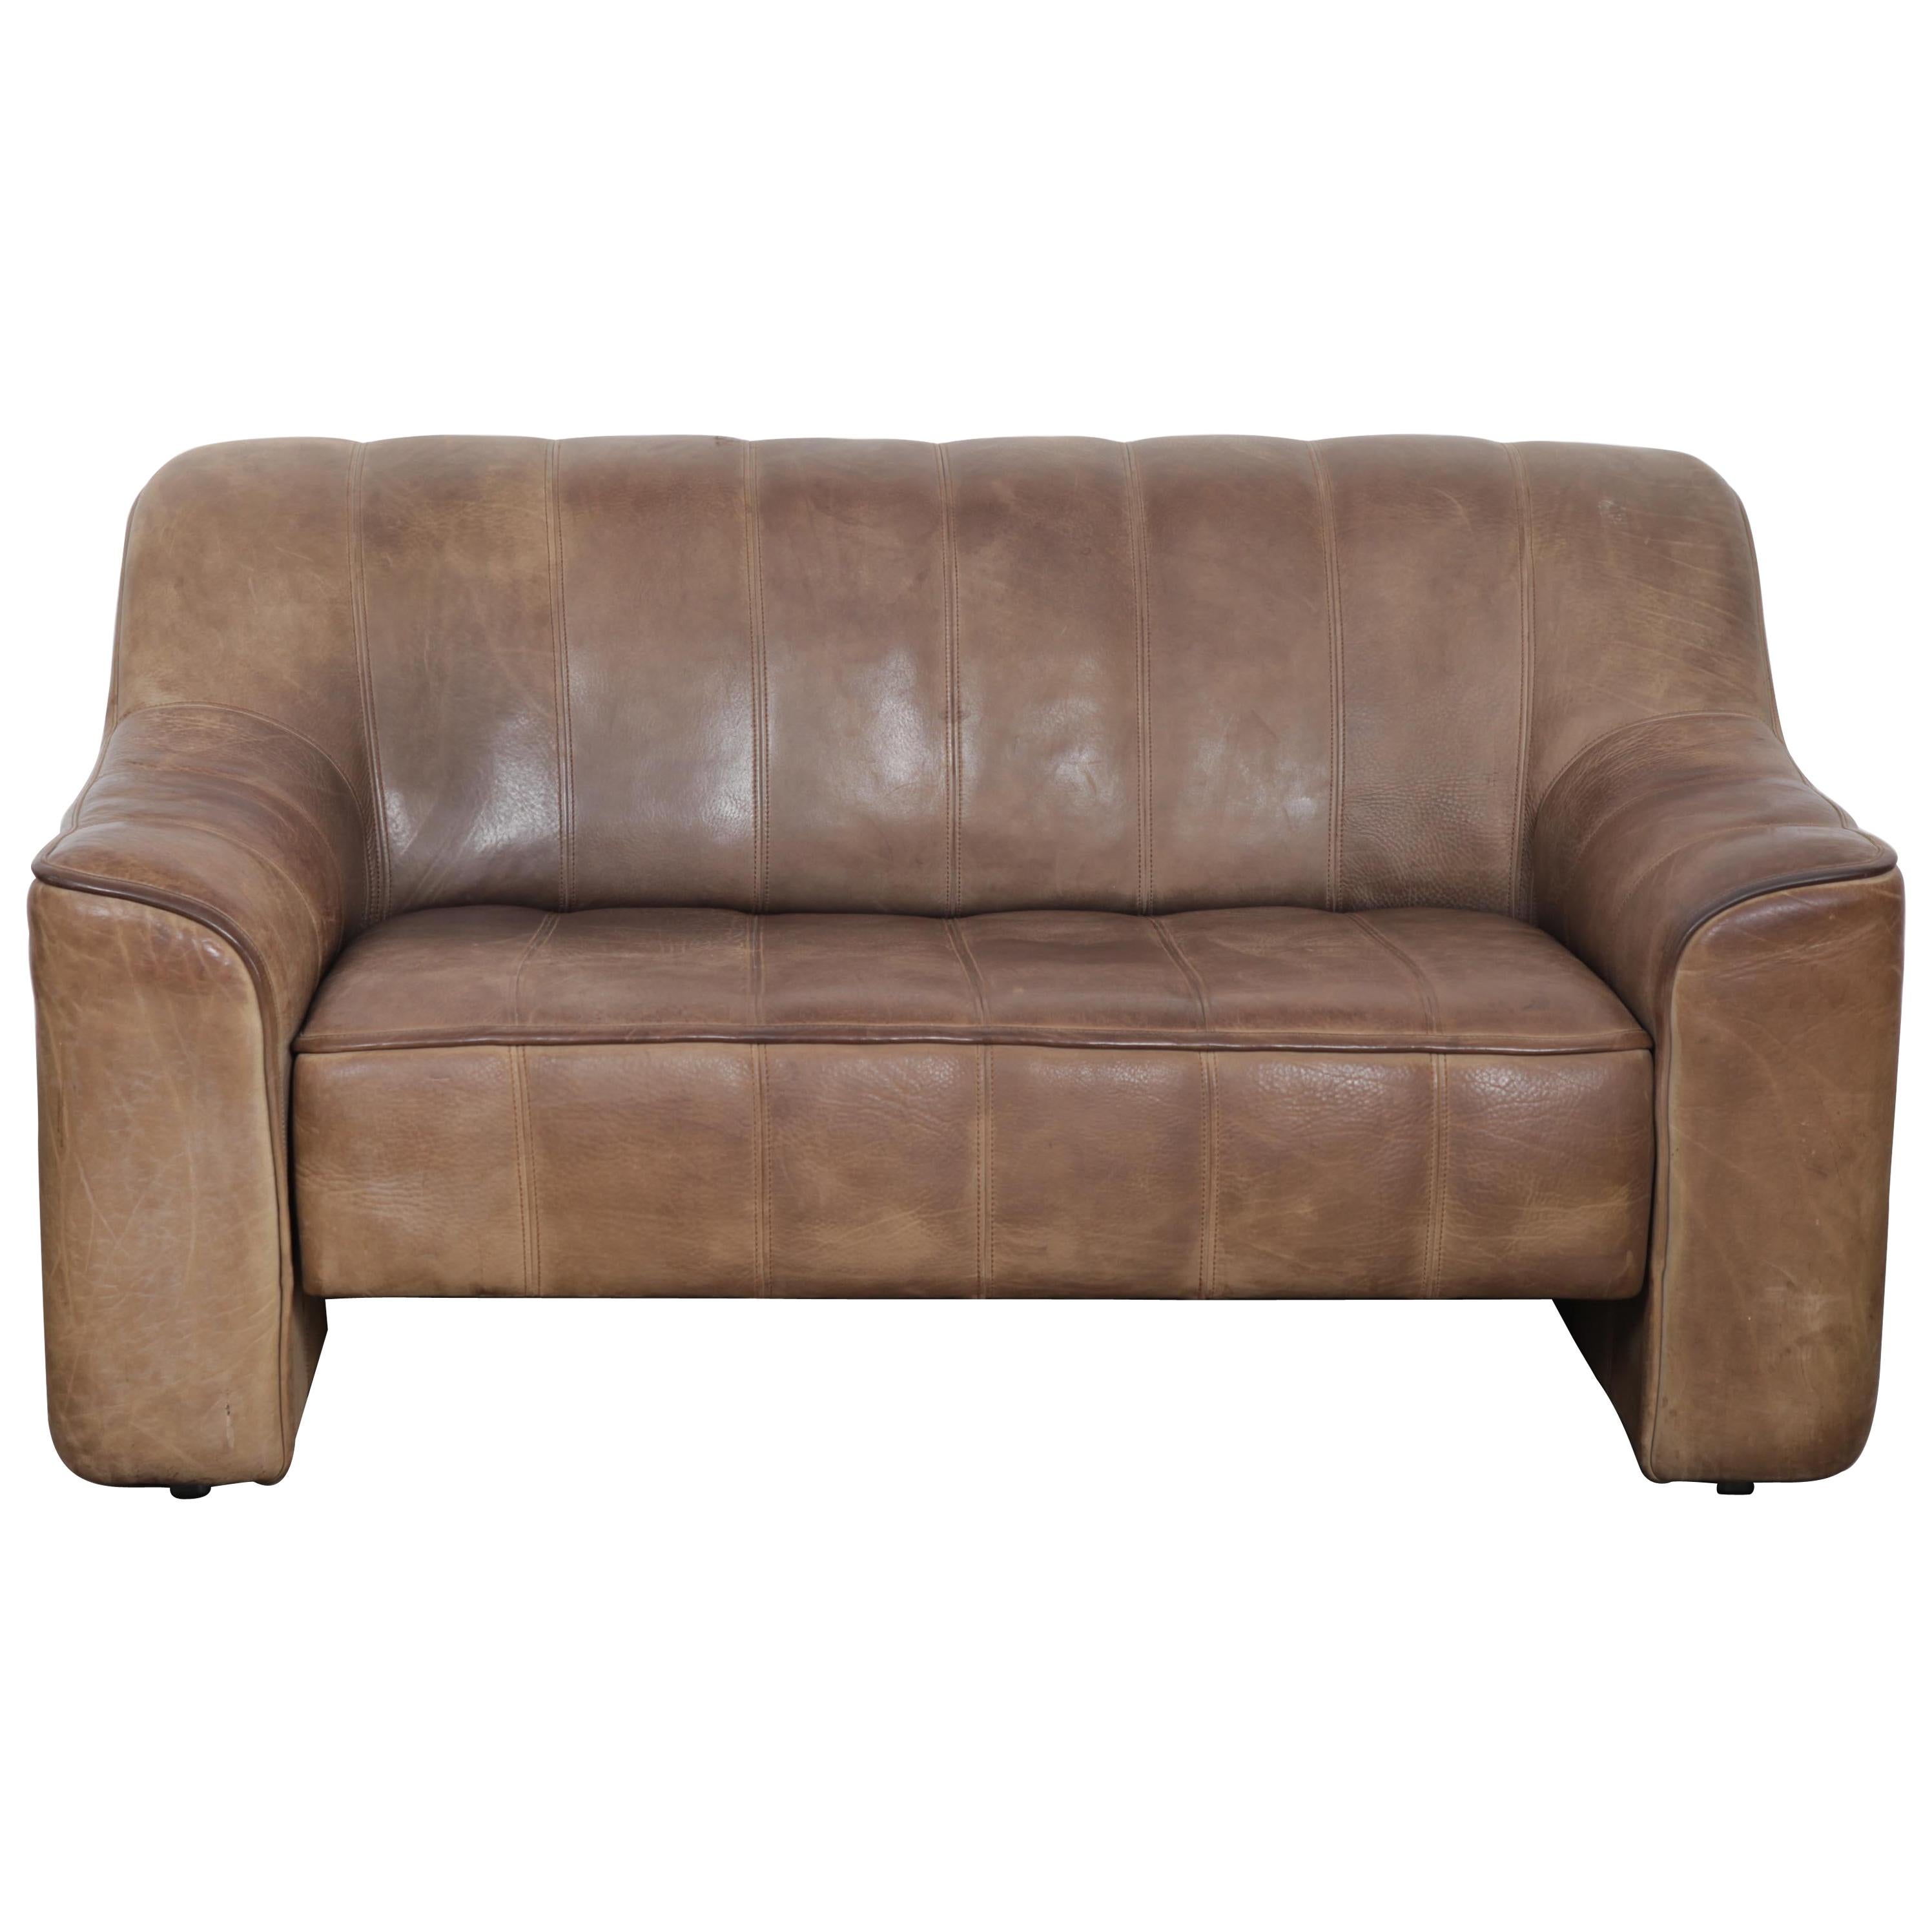 De Sede DS 44 2-Seat Sofa in Buffalo Leather, Switzerland, 1970s For Sale